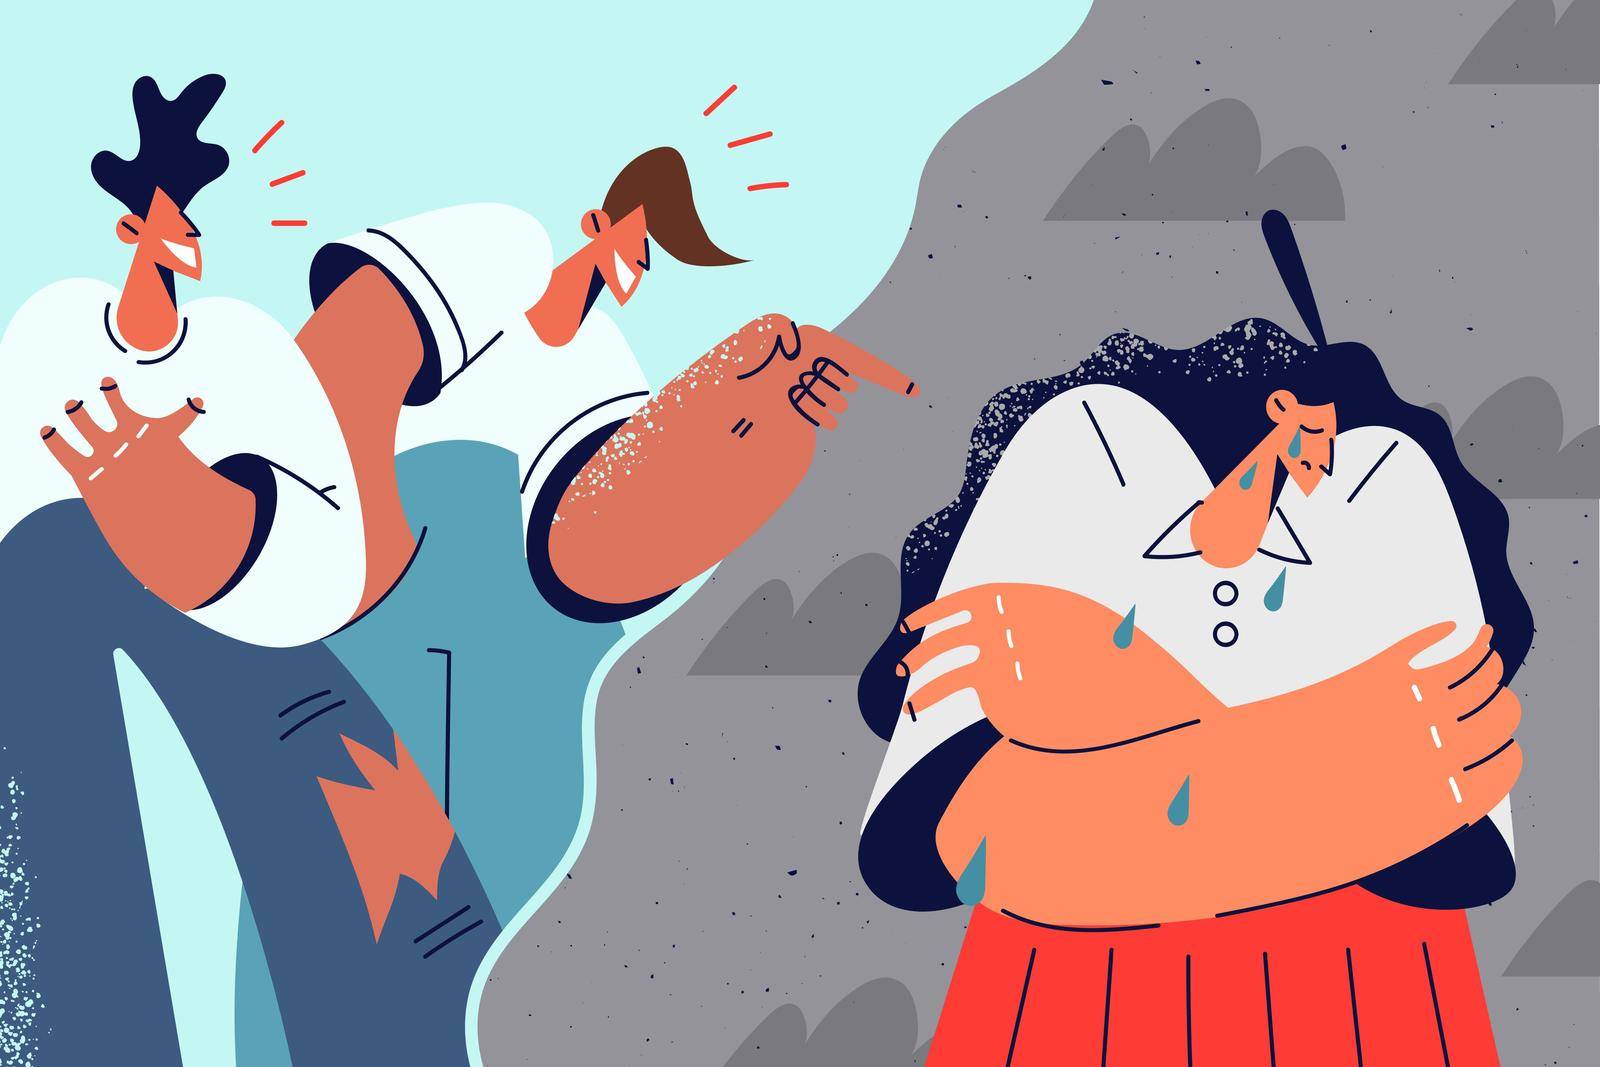 Bad unfriendly guys laughing at unhappy stressed female student. Aggressive students point with finger bullying harassing girl in school. Mockery and harassment. Vector illustration.